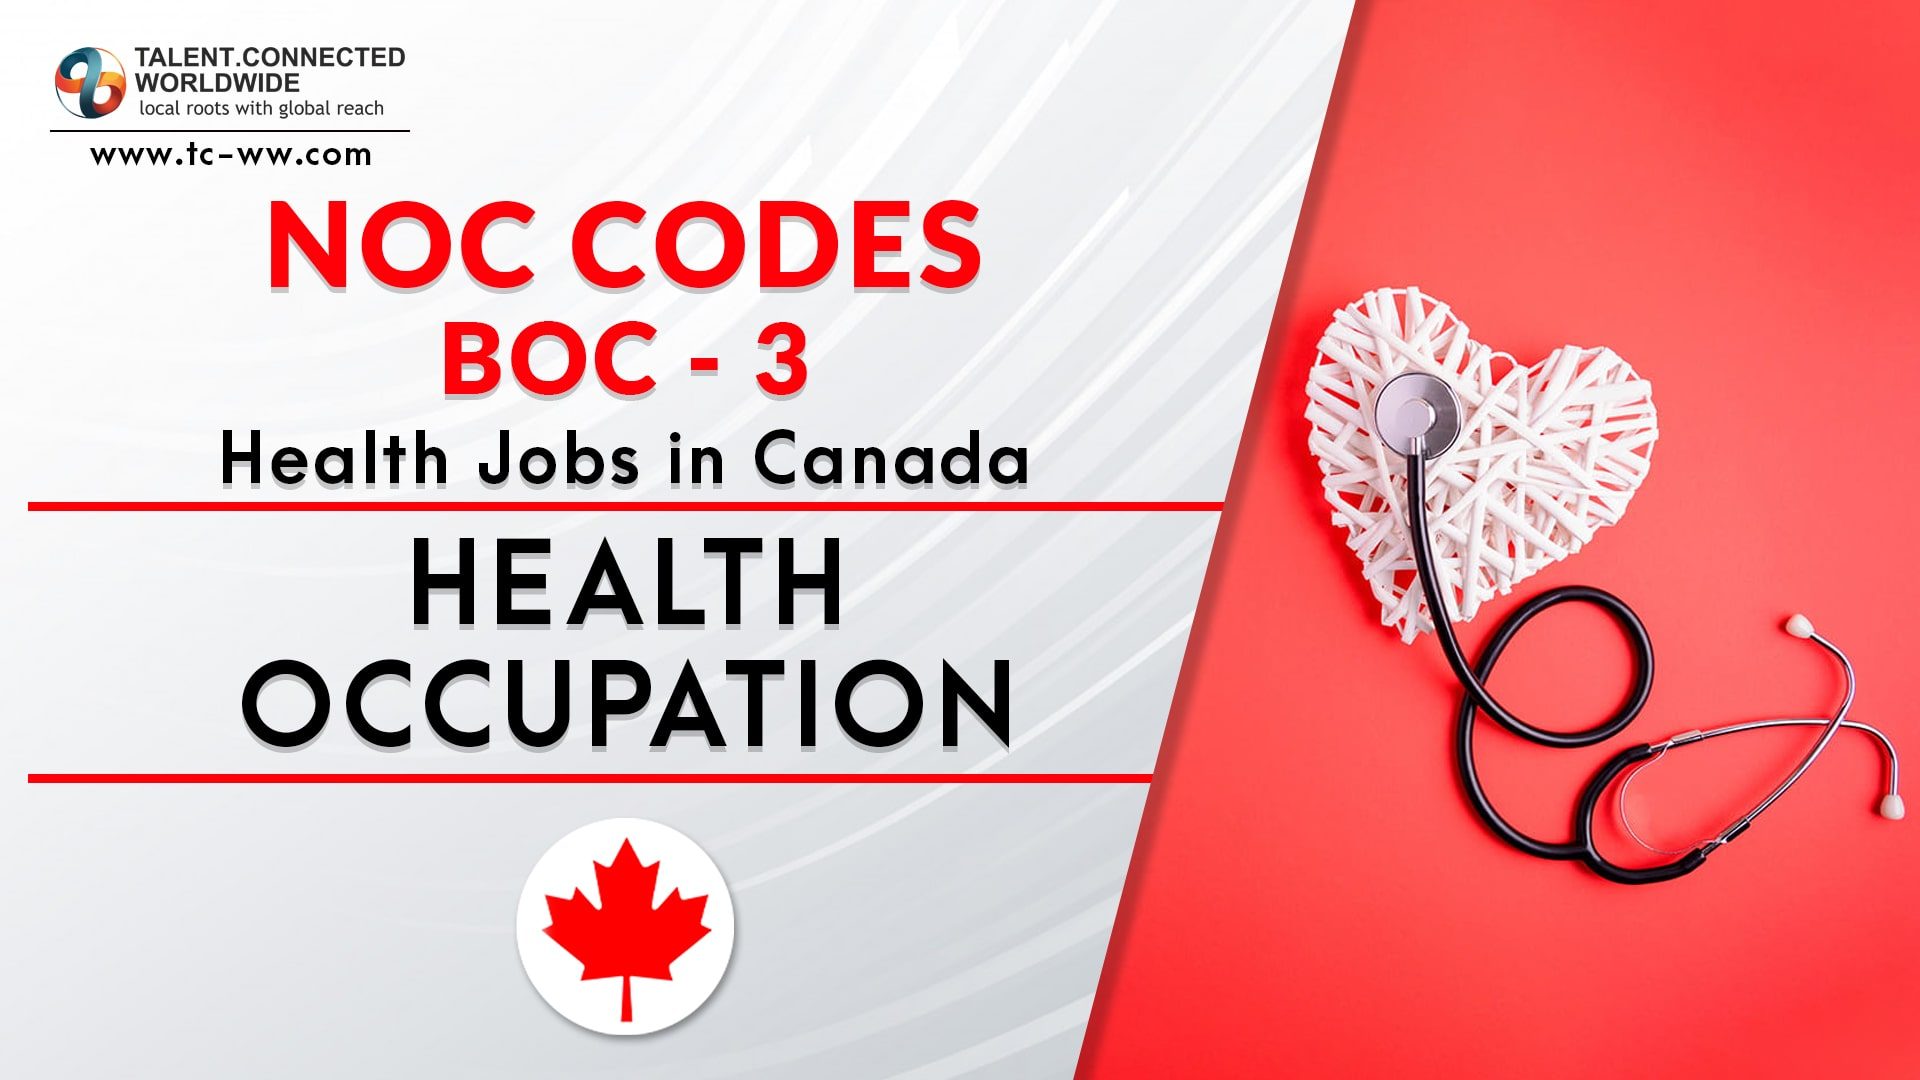 Healthcare Jobs in Canada and their New NOC Codes BOC3